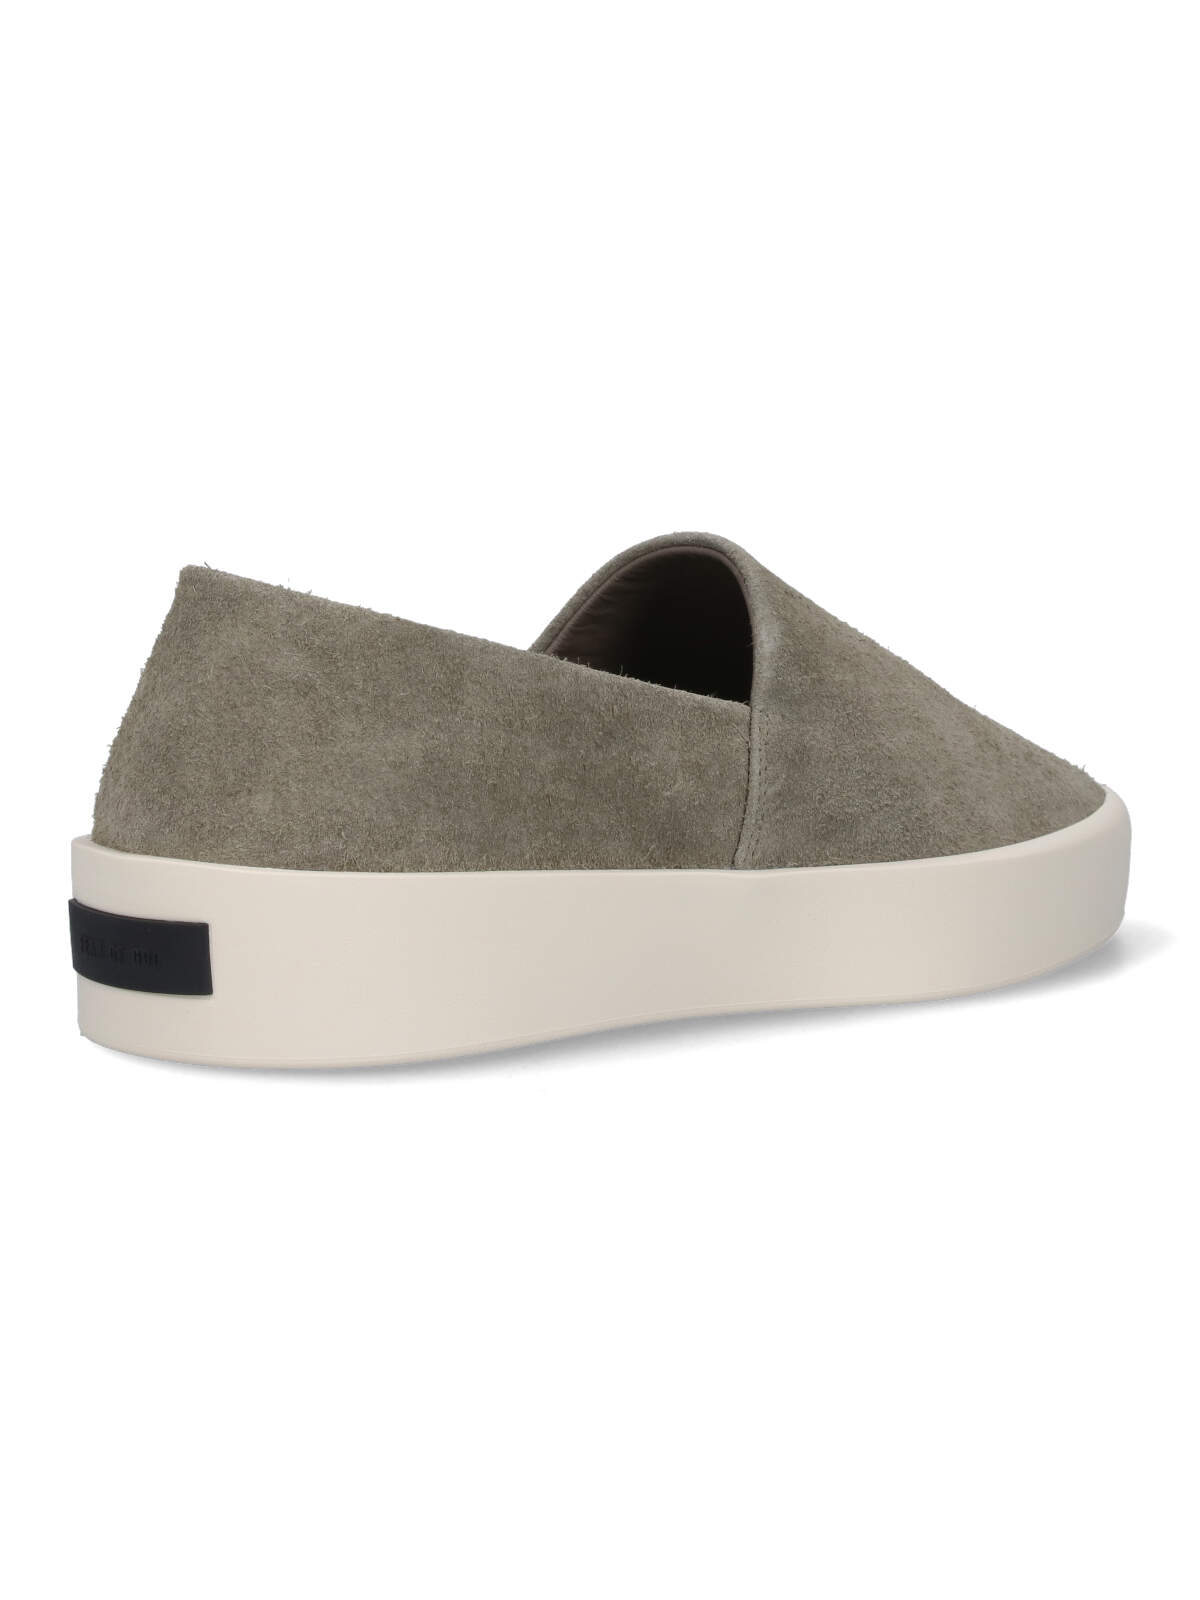 Shop Fear Of God Espadrilles Sneakers In Taupe